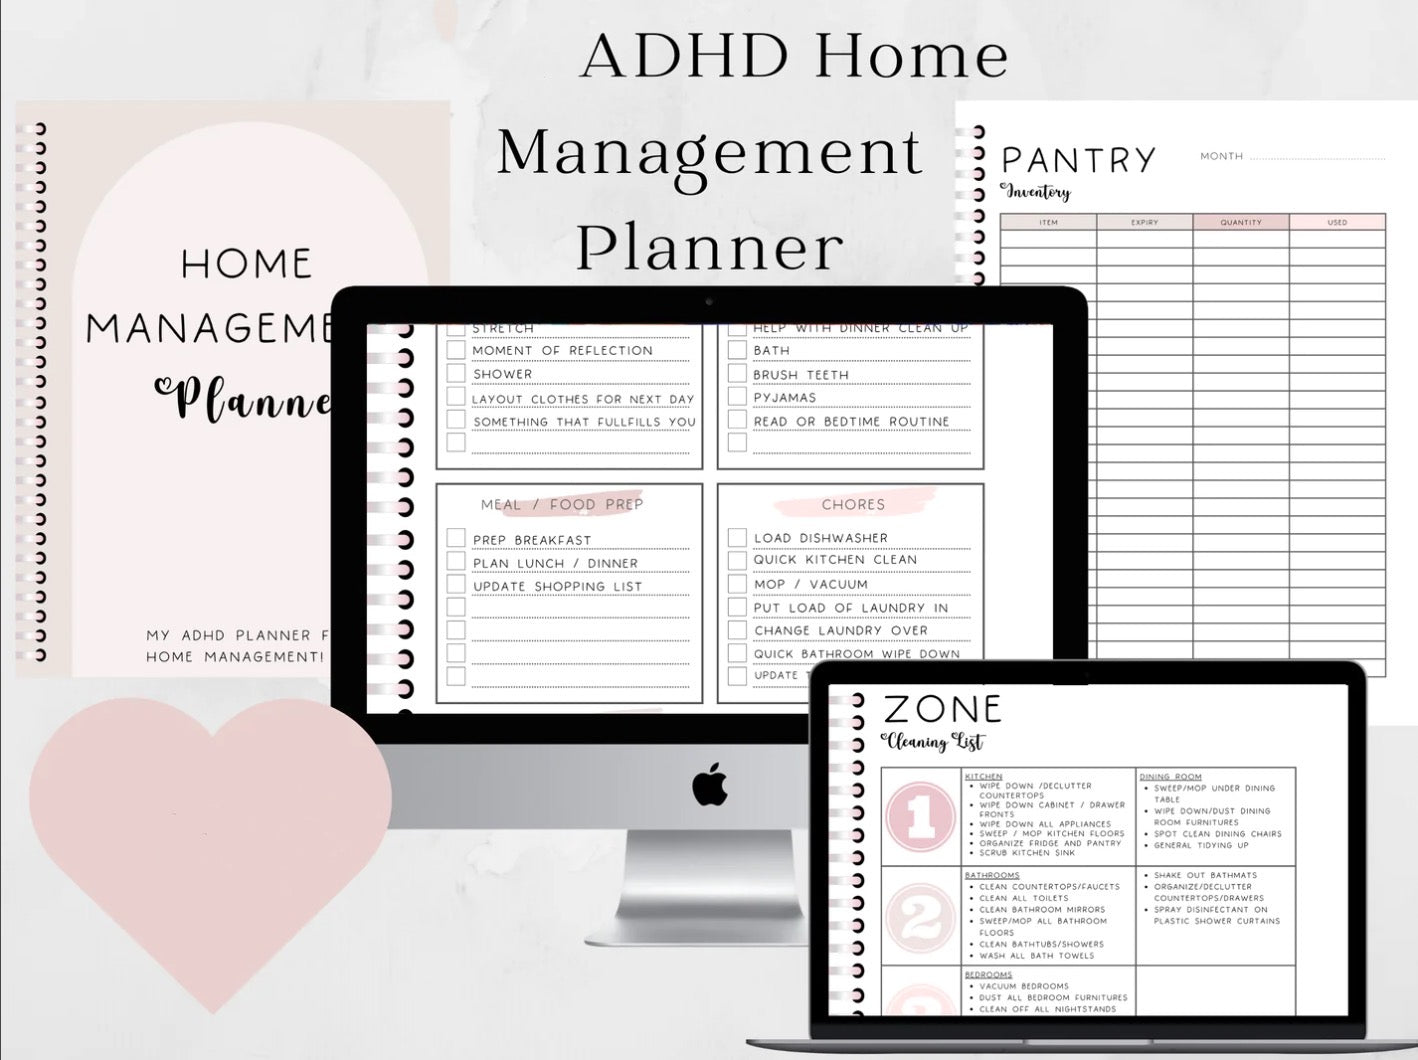 ADHD Home Management Planner Template